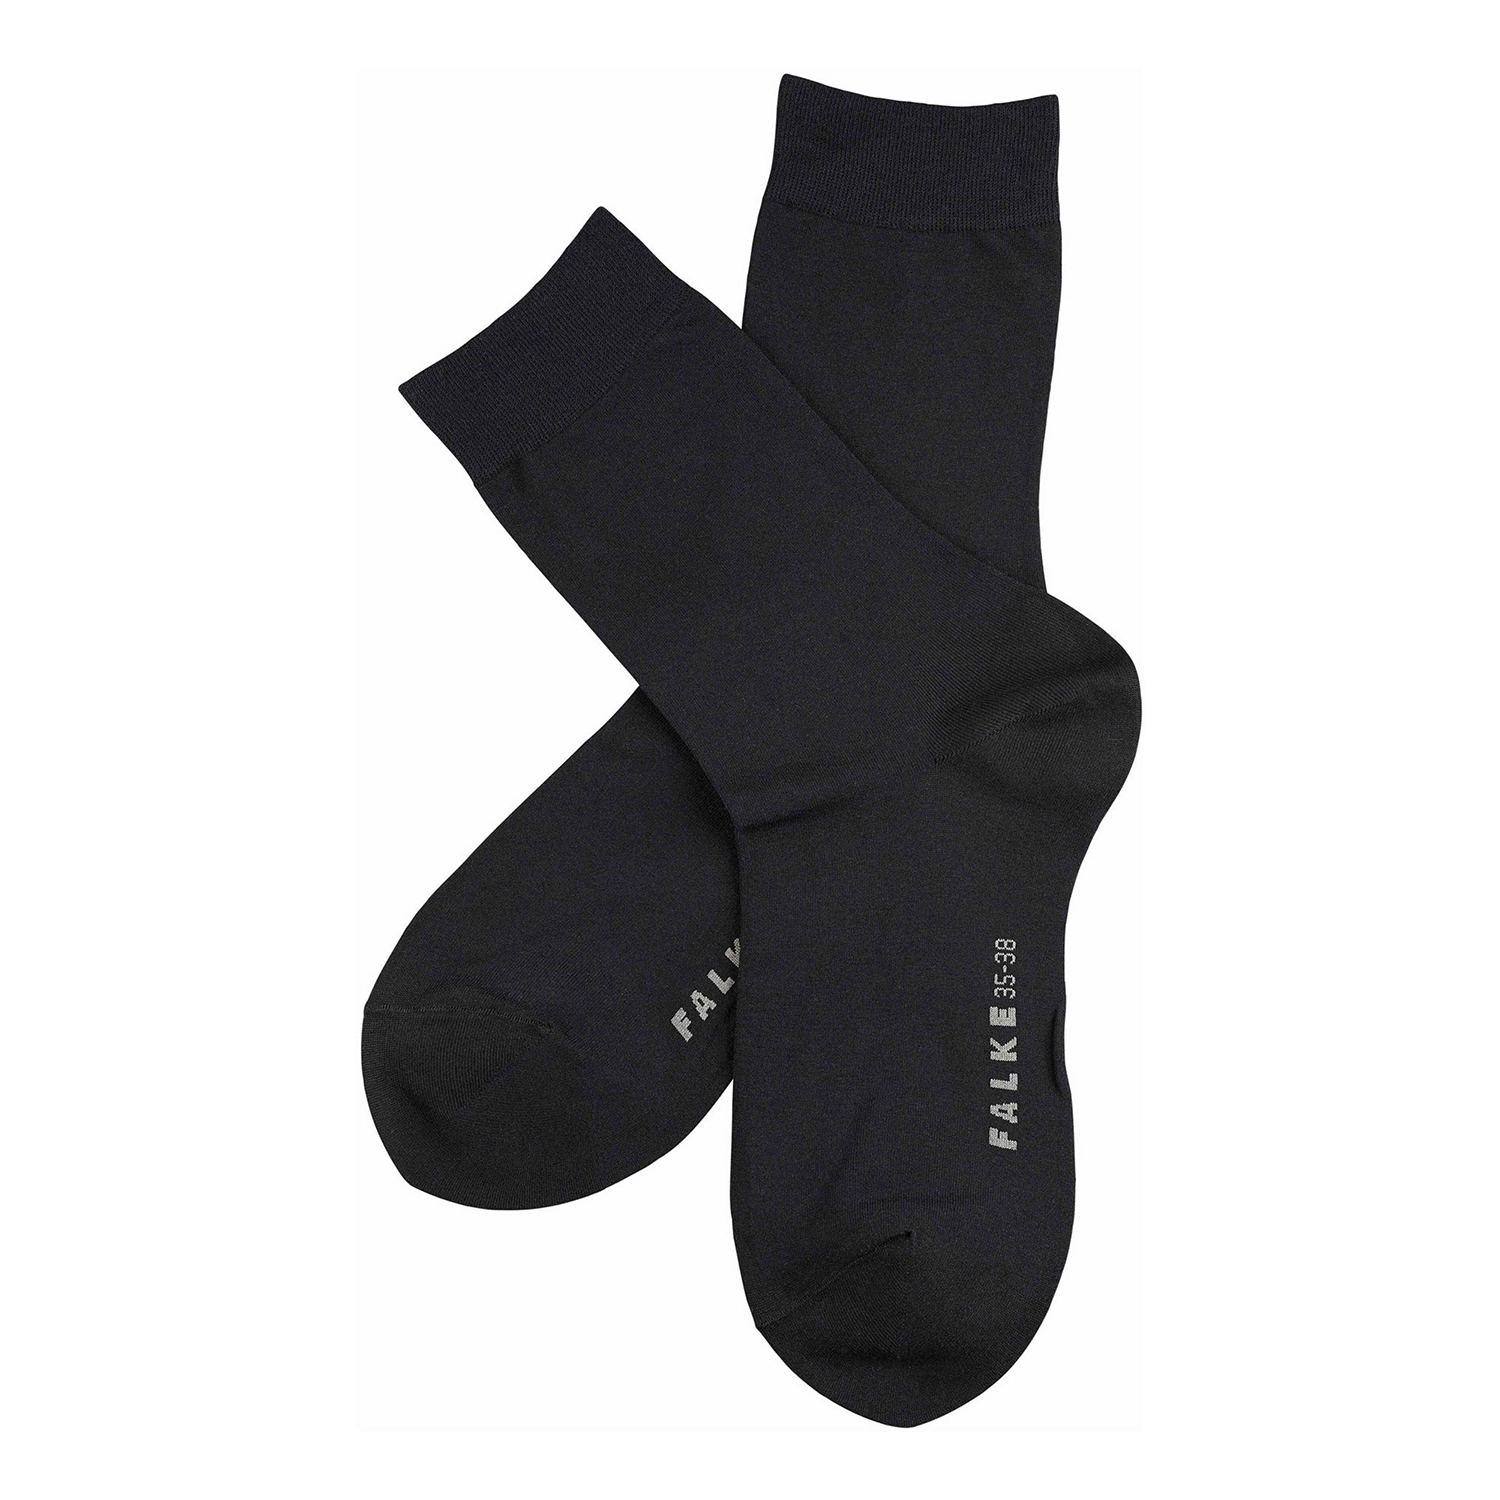 Cotton Touch Socks